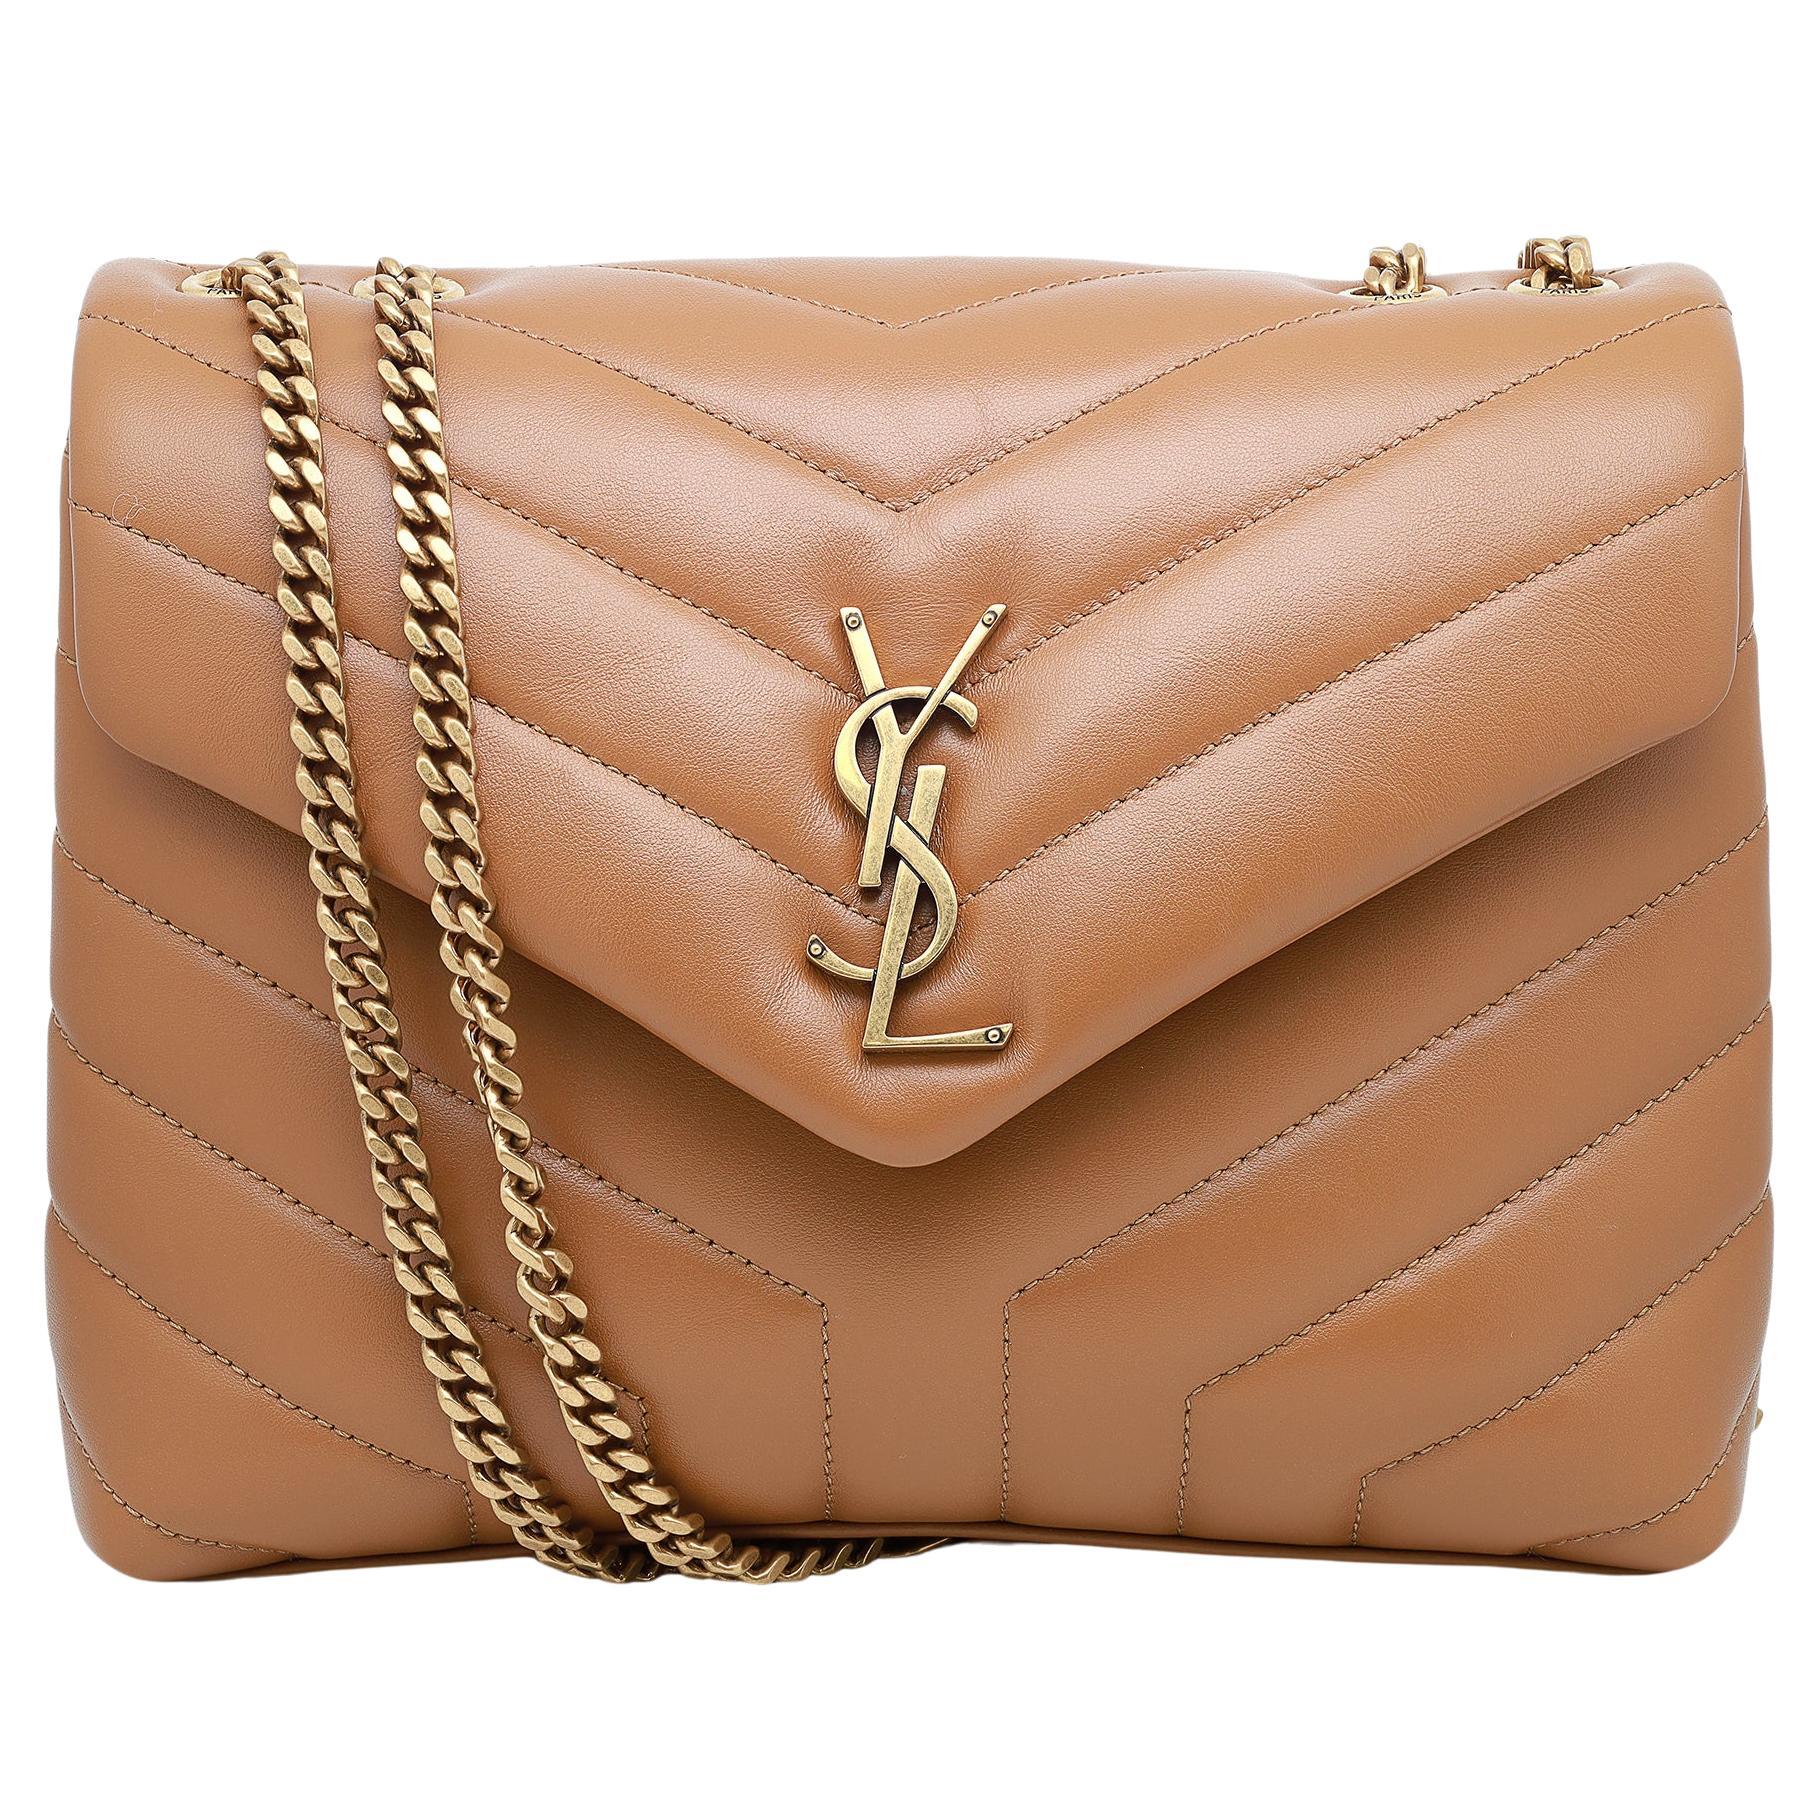  Saint Laurent Loulou Small Quilted Leather Dark Natural Crossbody Bag